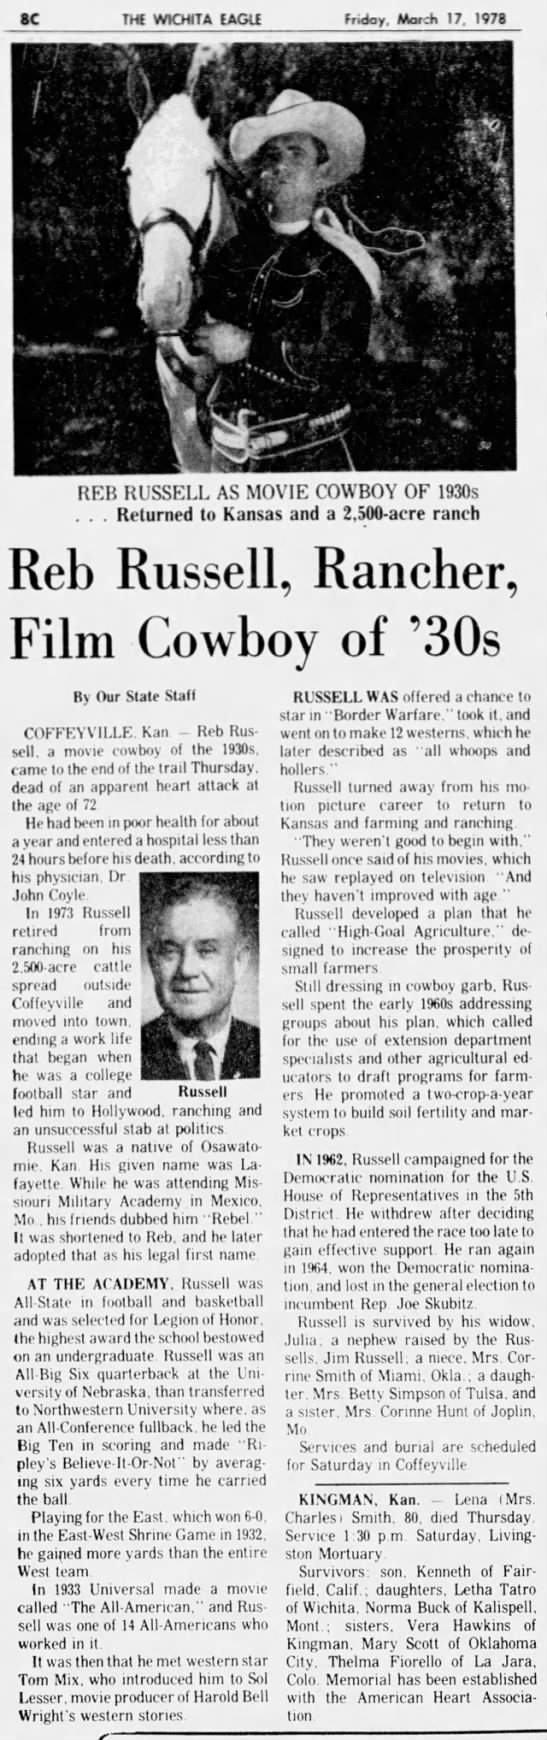 1978 death notice for Lafayette H. Russell. He was western movie hero "Reb Russell". - 